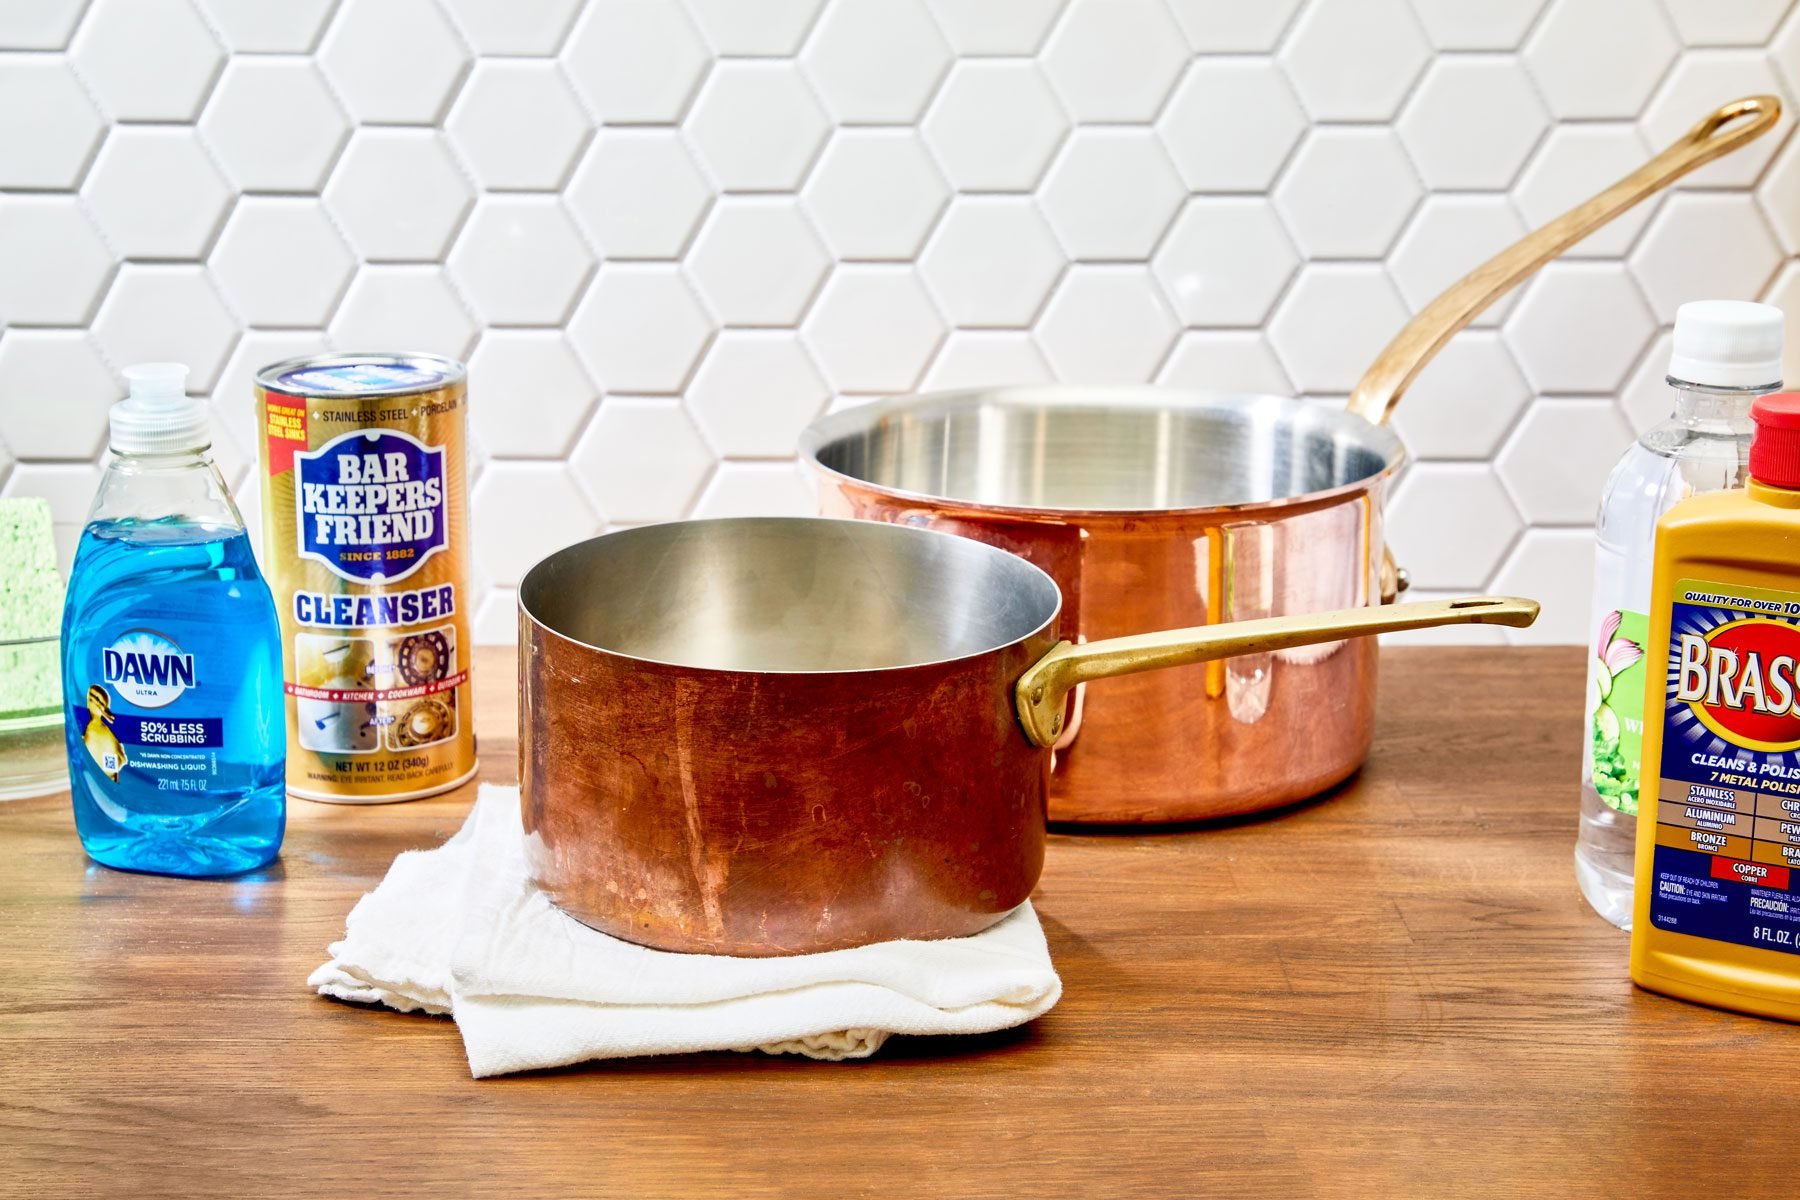 Martha and the Art of Collecting Copper Cookware